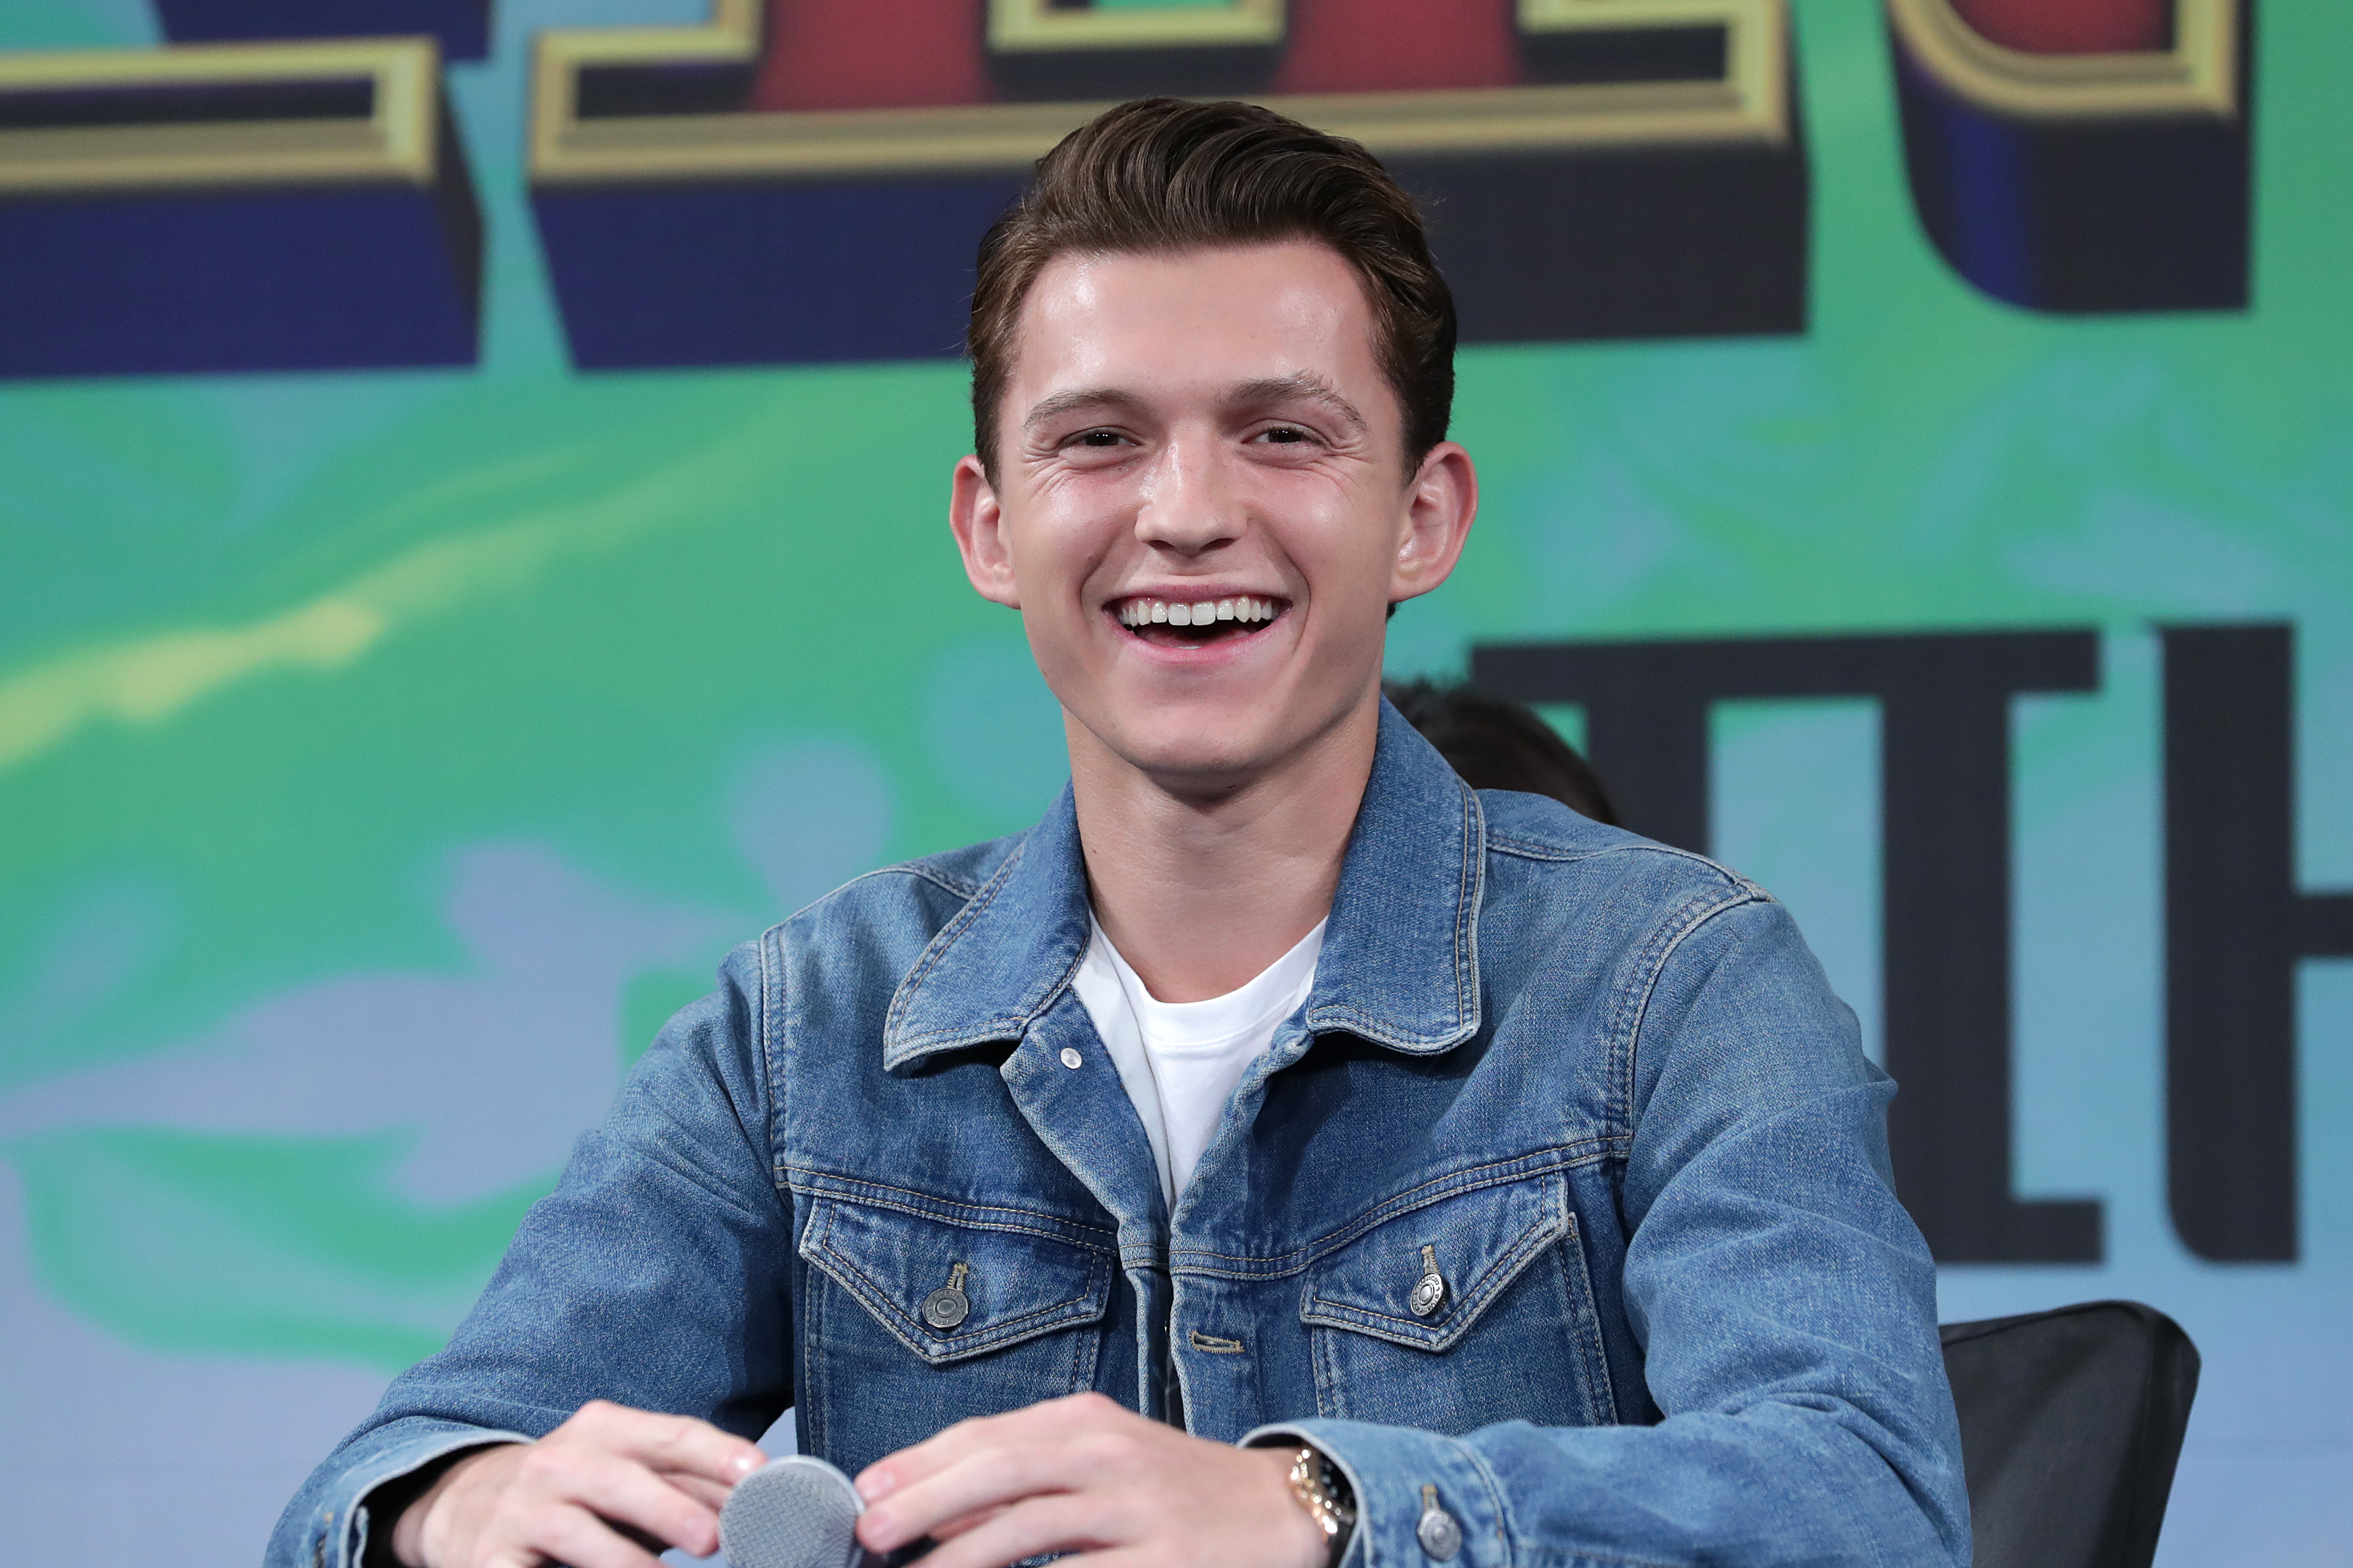 Tom Holland, Bless Him, Is Hosting A Massive Marvel Pub Quiz On Insta This Week